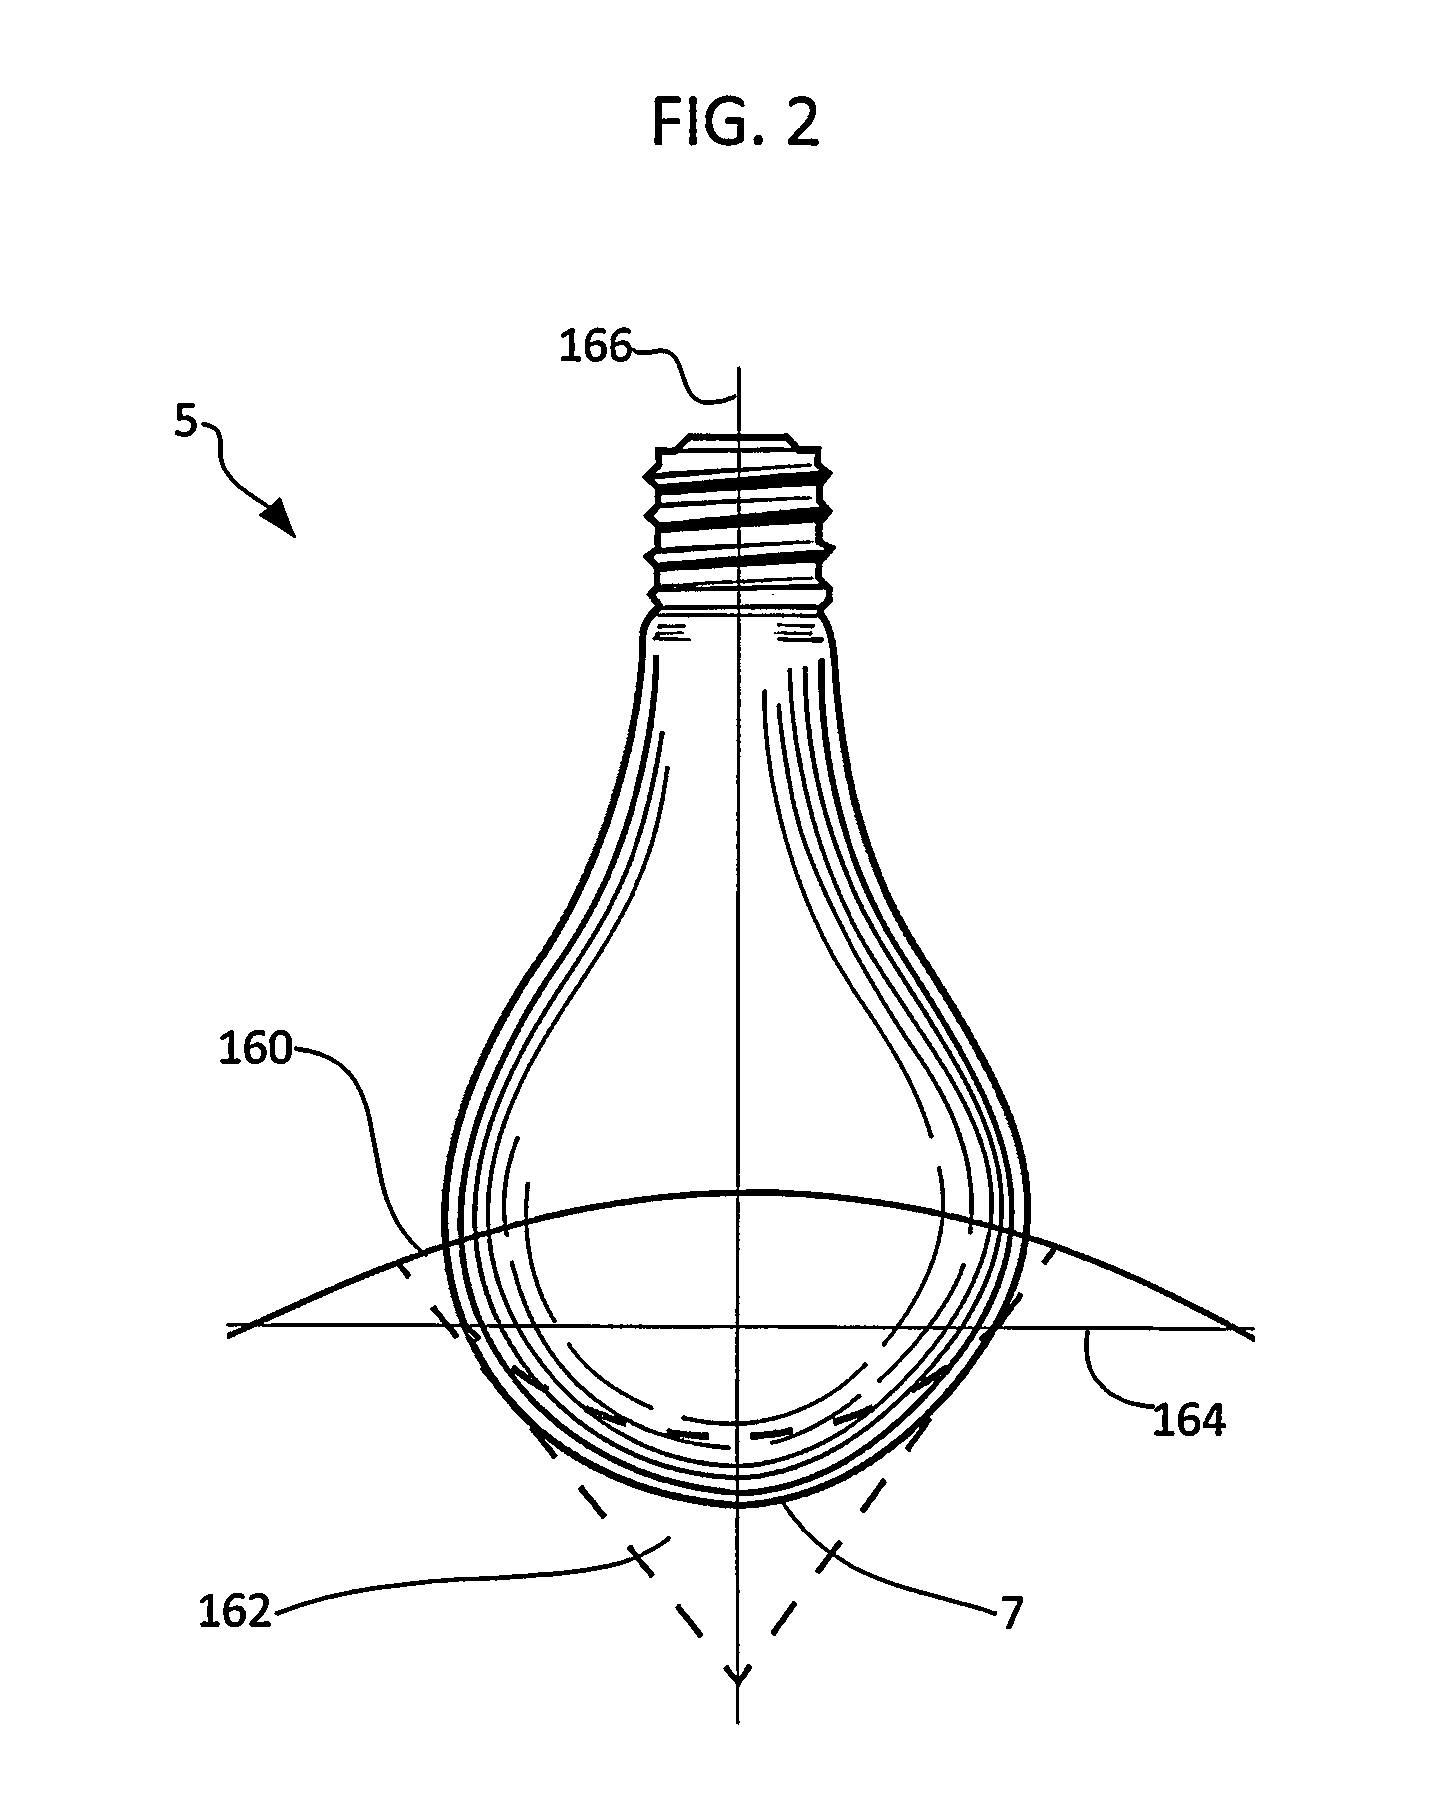 Light bulb installation and removal tool